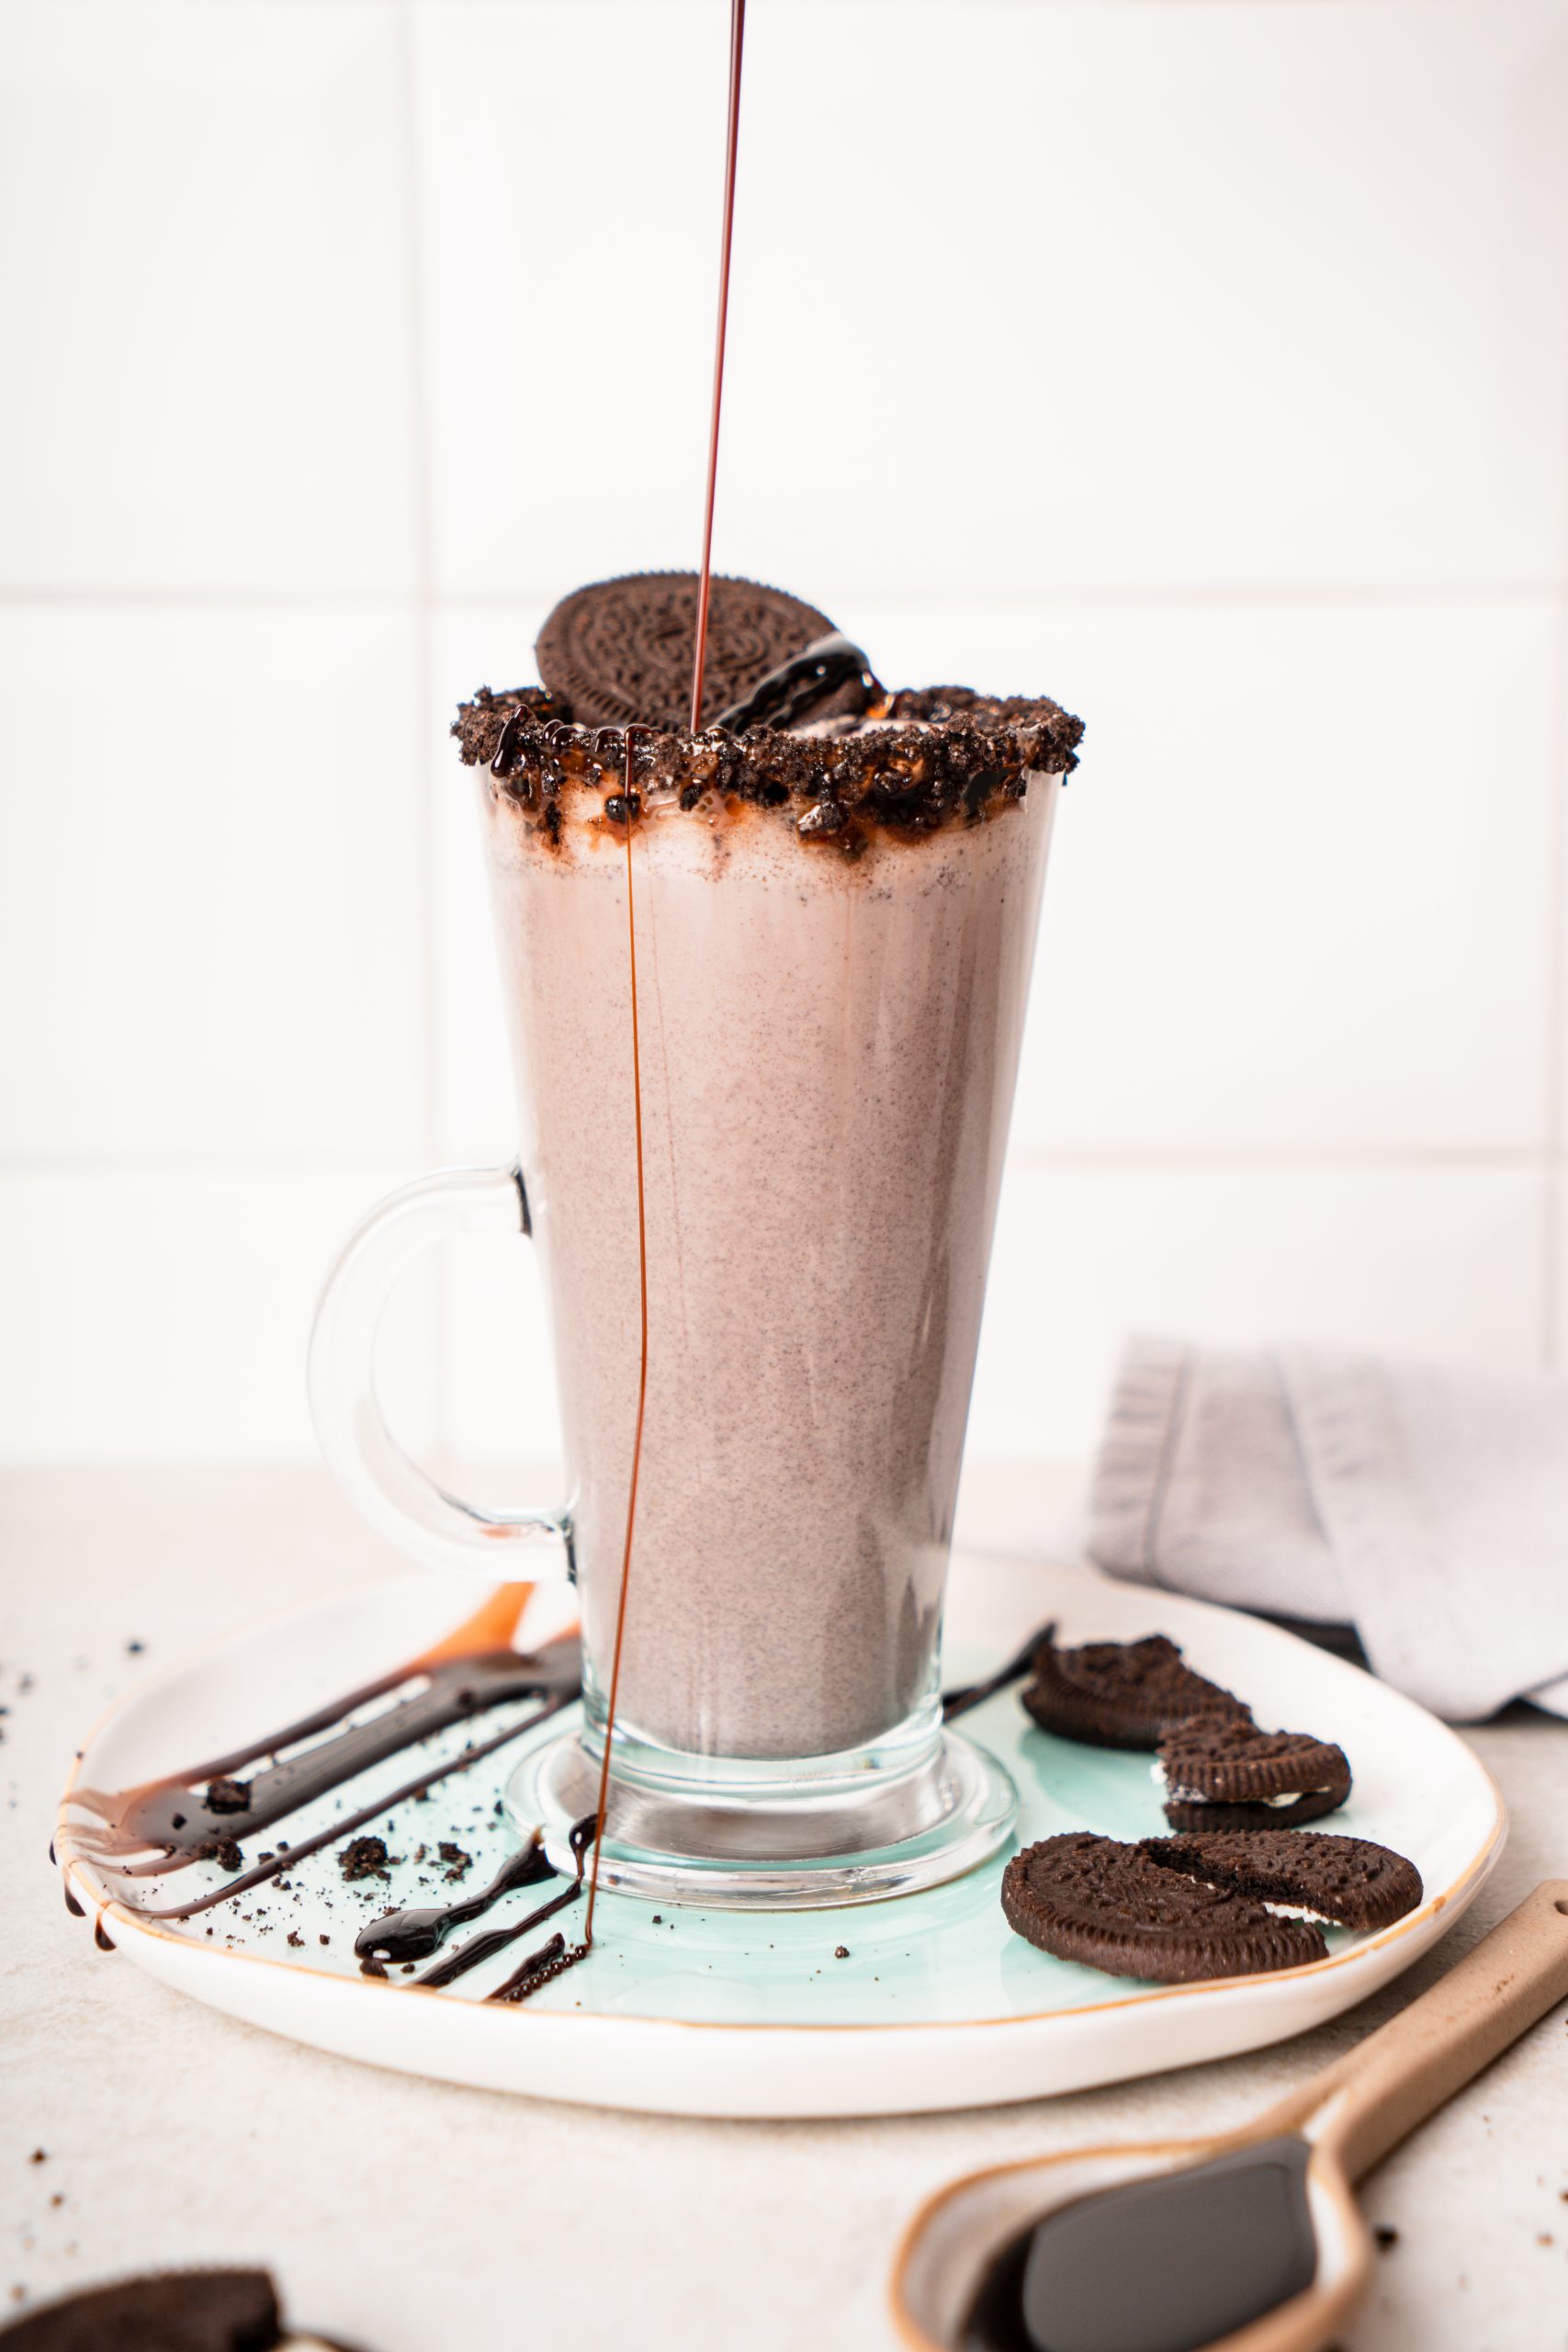 An Oreo milkshake is an ideal dessert for a hot summer day; it's cold, has an exceptional taste, and is insanely easy to make. What more can you ask for?